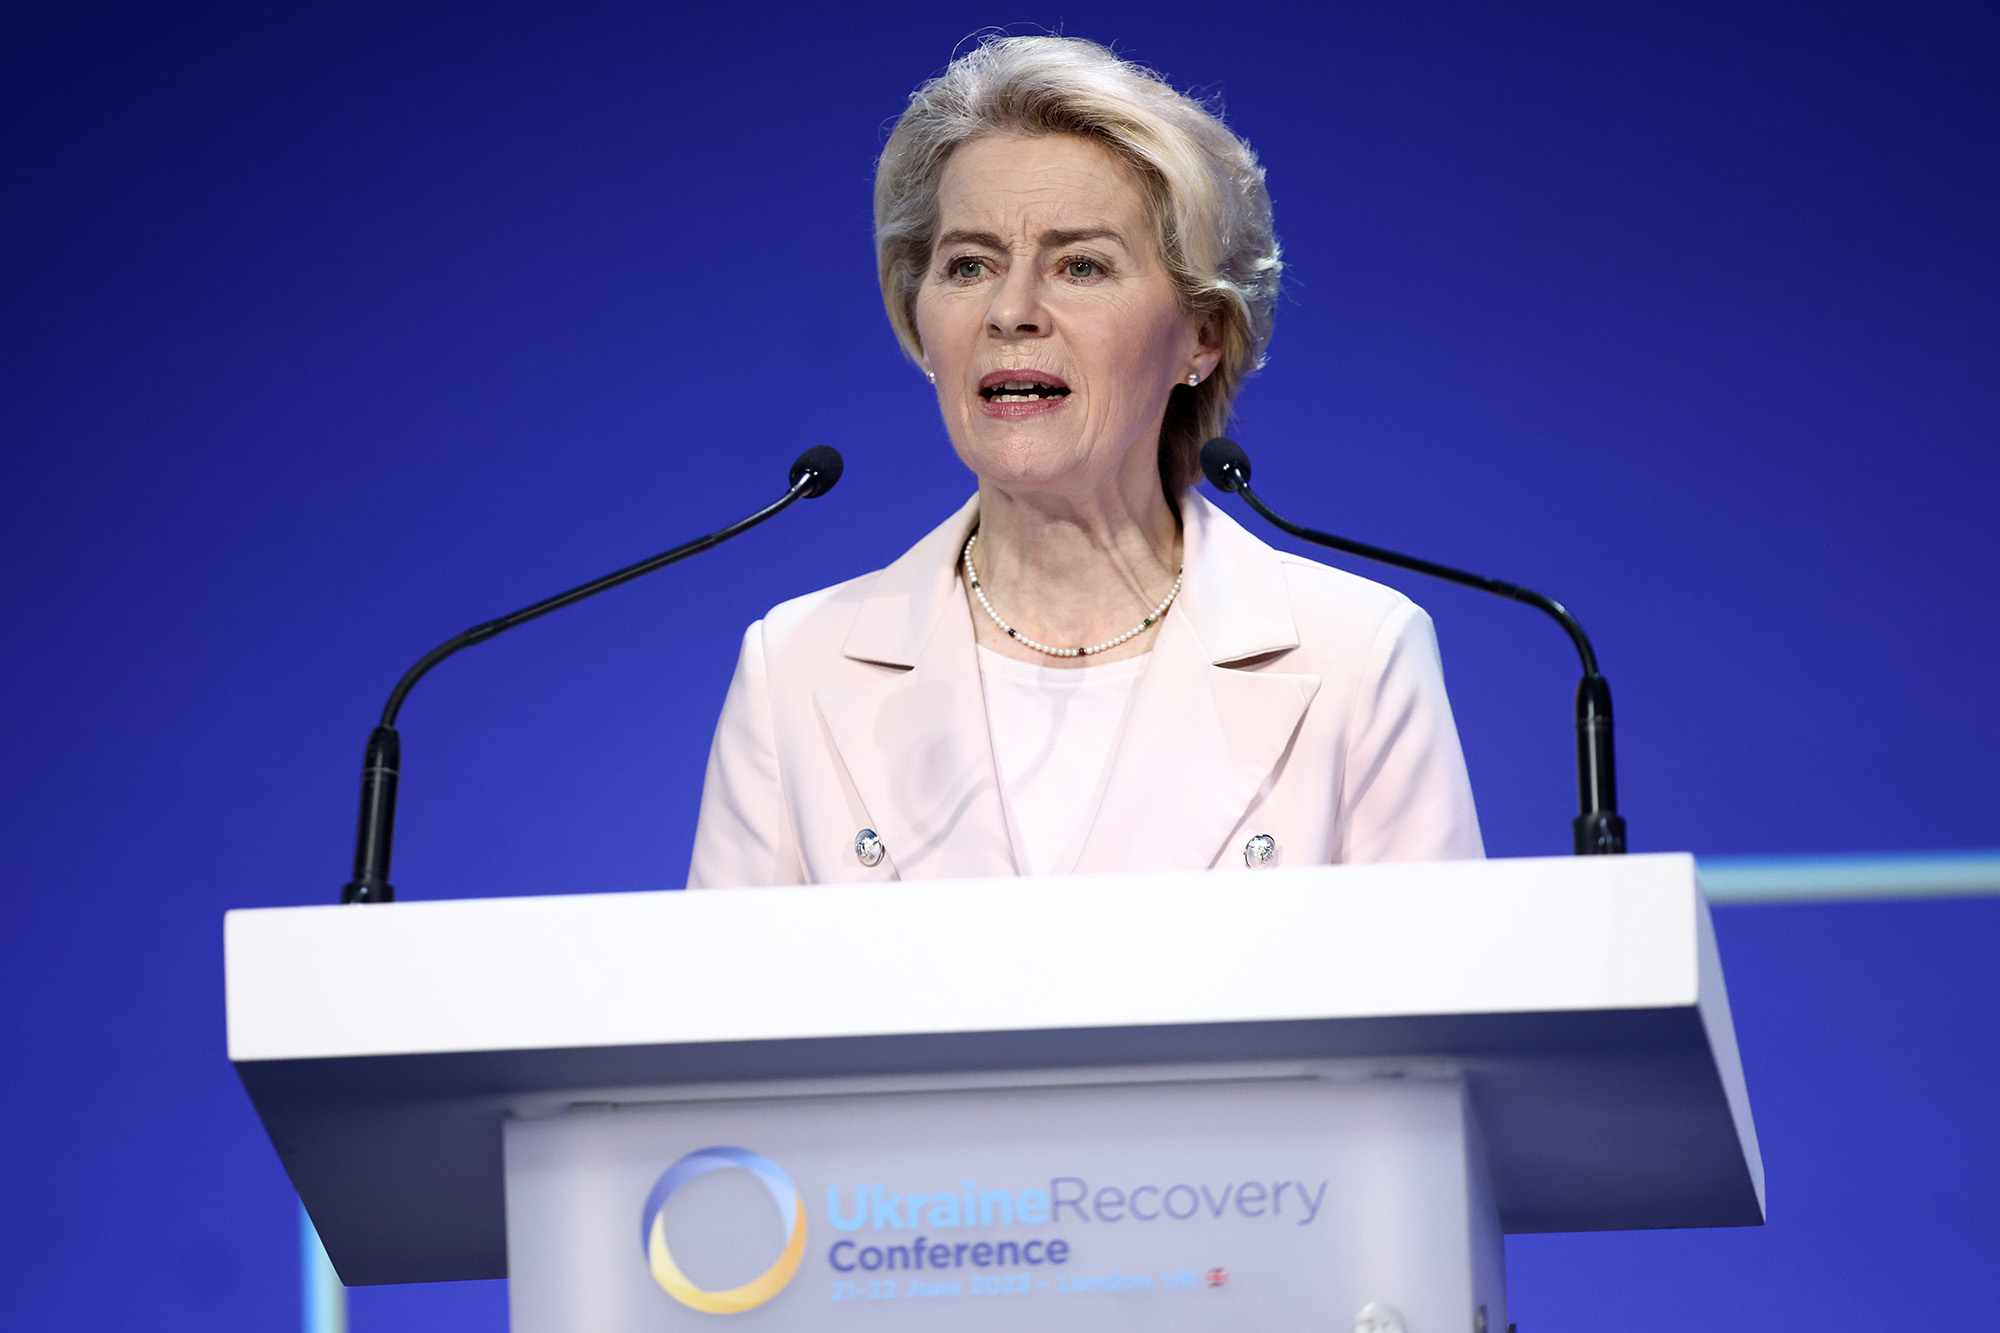 European Commission President Ursula von der Leyen addresses the opening session on the first day of the Ukraine Recovery Conference in London, England on June 21.